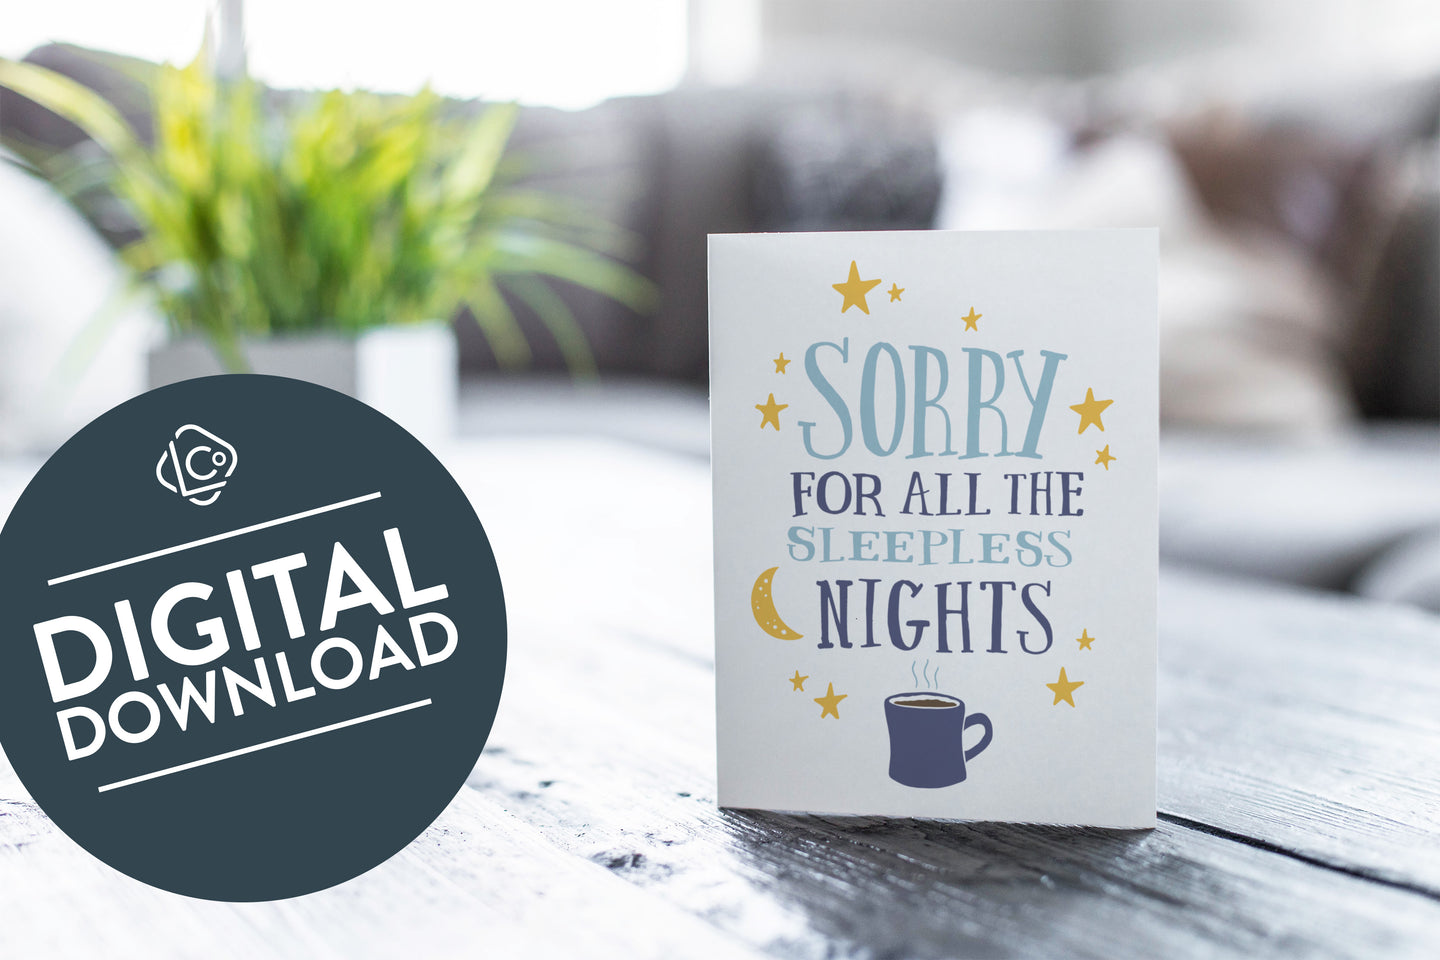 A greeting card featured on a black, wood coffee table. There’s a white planter in the background with a green plant. There’s also a gray sofa in the background with a white pillow. The card features the words “Sorry for all the sleepless nights.” The words 